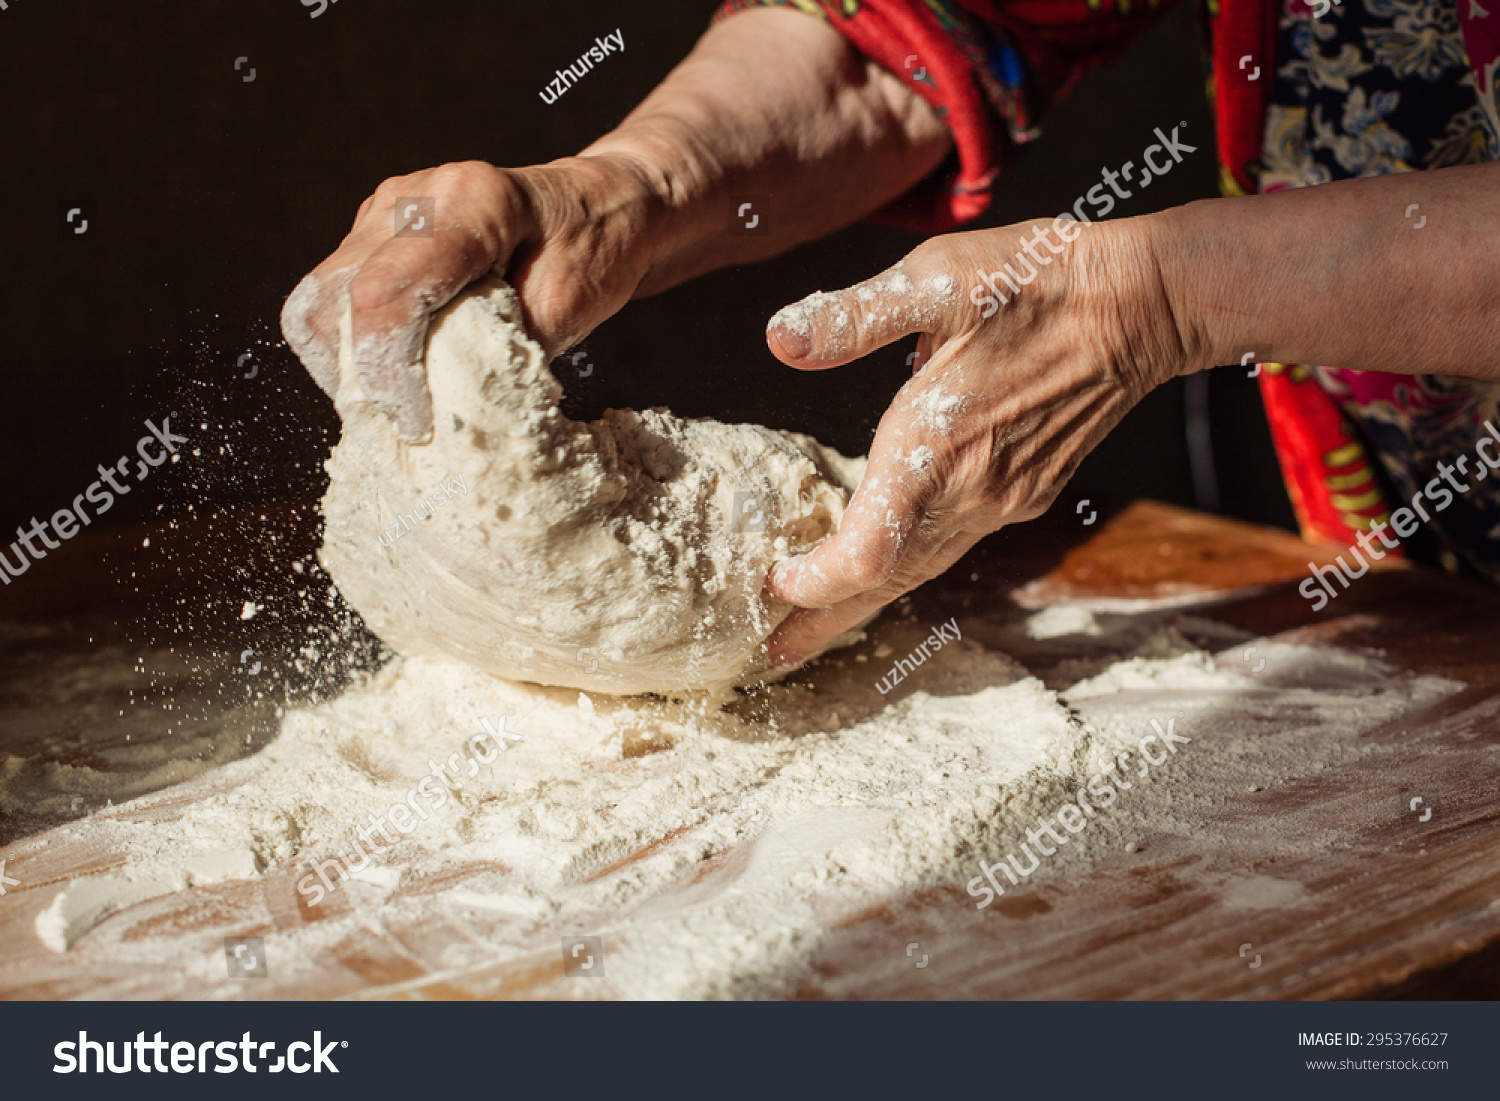 Senior woman hands knead dough on a table in her home kitchen #295376627